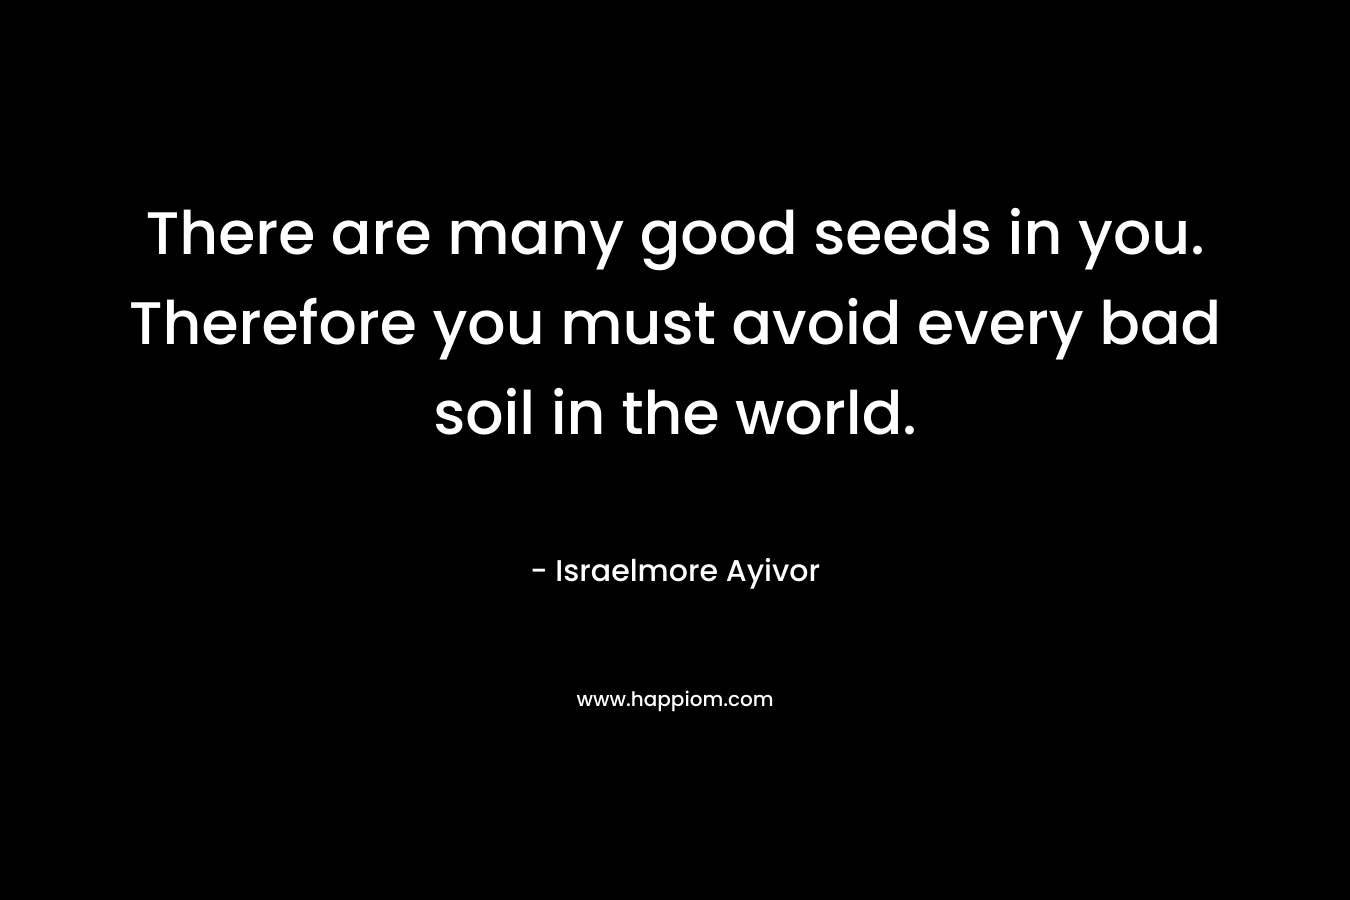 There are many good seeds in you. Therefore you must avoid every bad soil in the world.